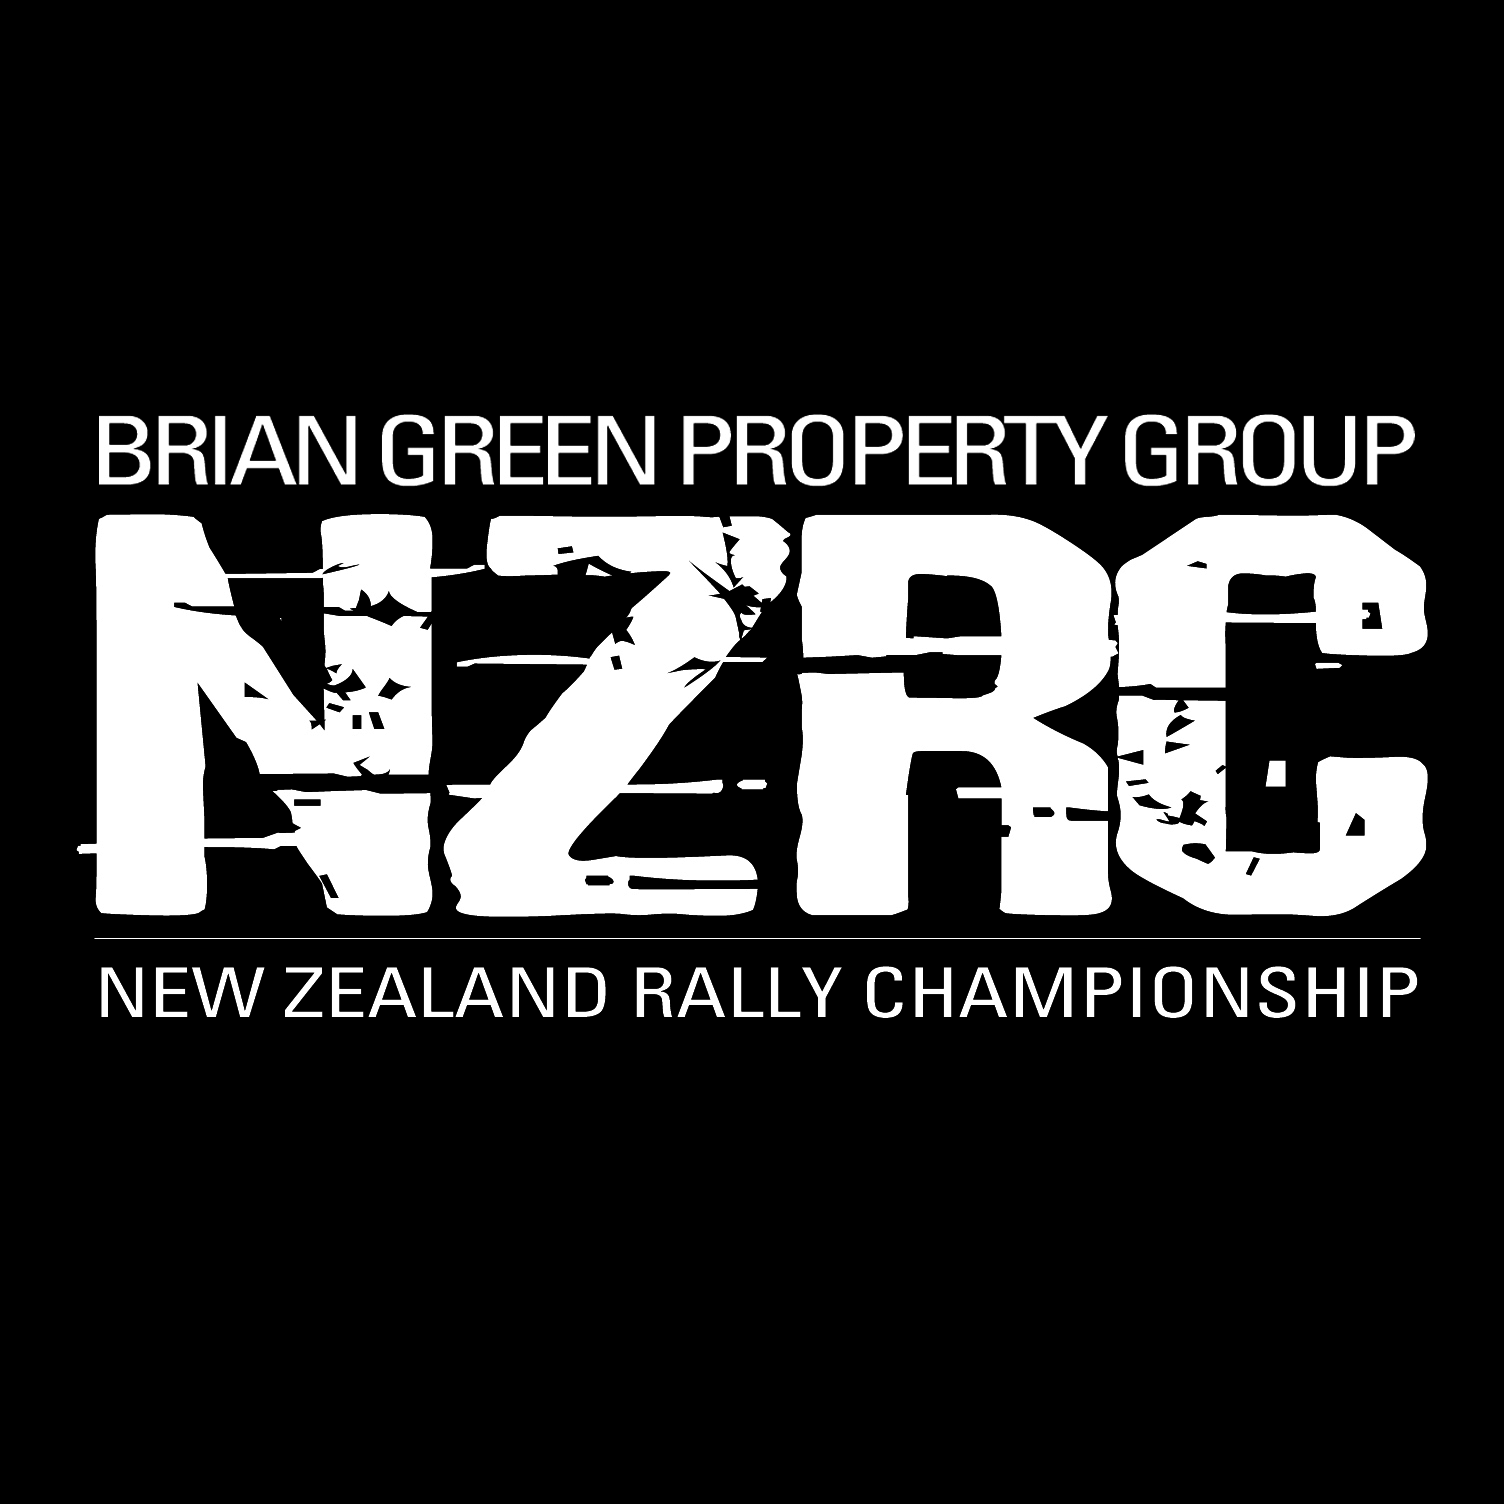 Regulations & Registration | :: Brian Green Property Group New Zealand Rally Championship ::